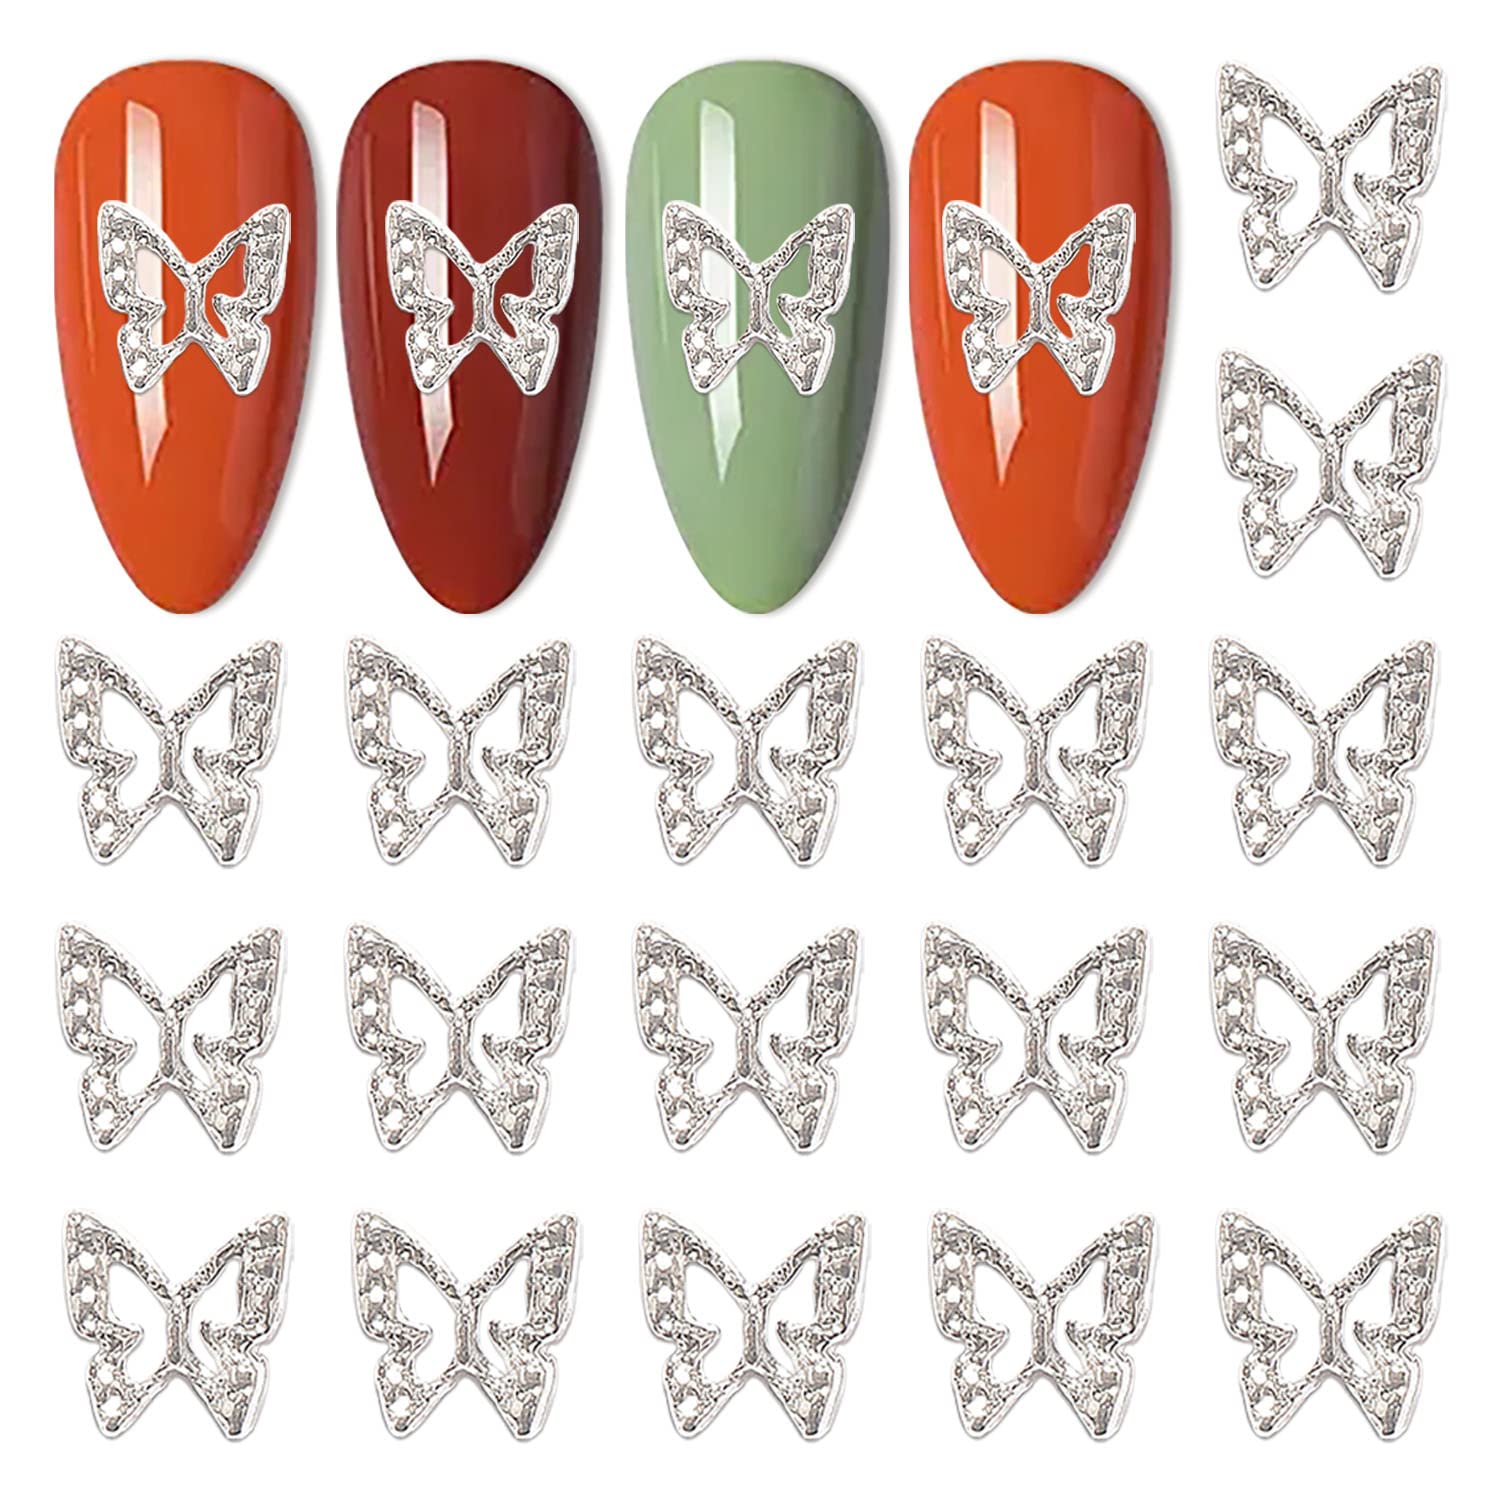  DANNEASY 12pcs Butterfly Nail Charms 3D Gold Silver